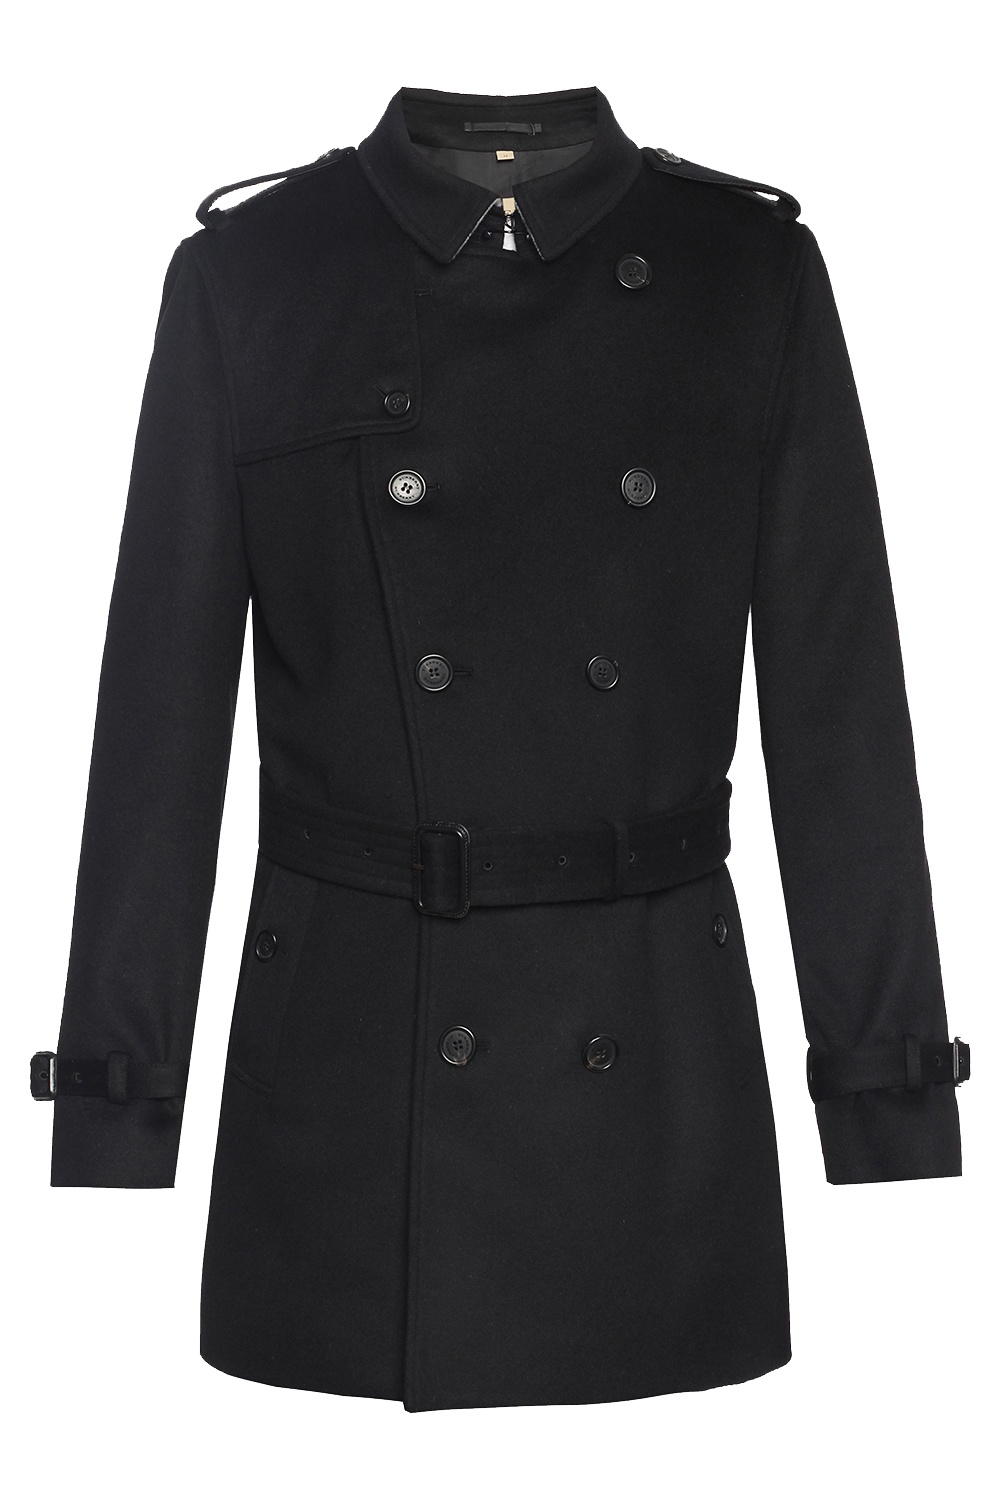 Black 'The Kensington' double-breasted trench coat Burberry - Vitkac France